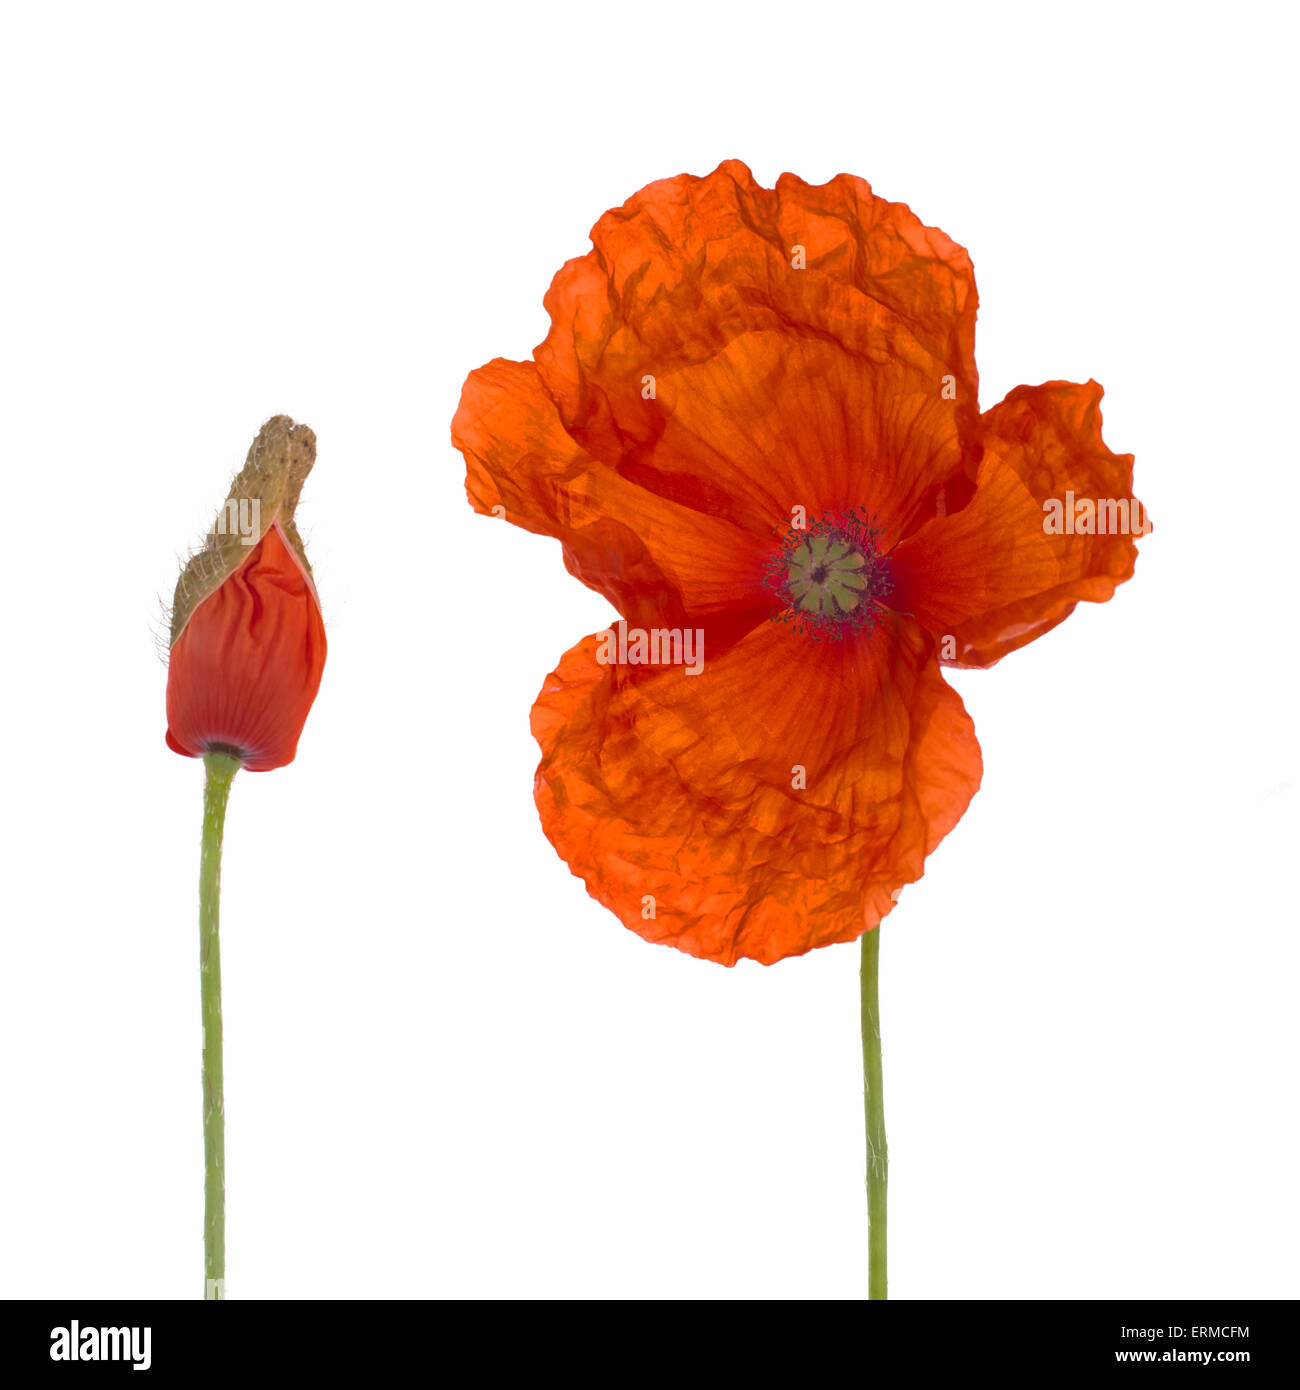 Flanders poppy et bud, studio isolated over white. Papaver rhoeas. Banque D'Images